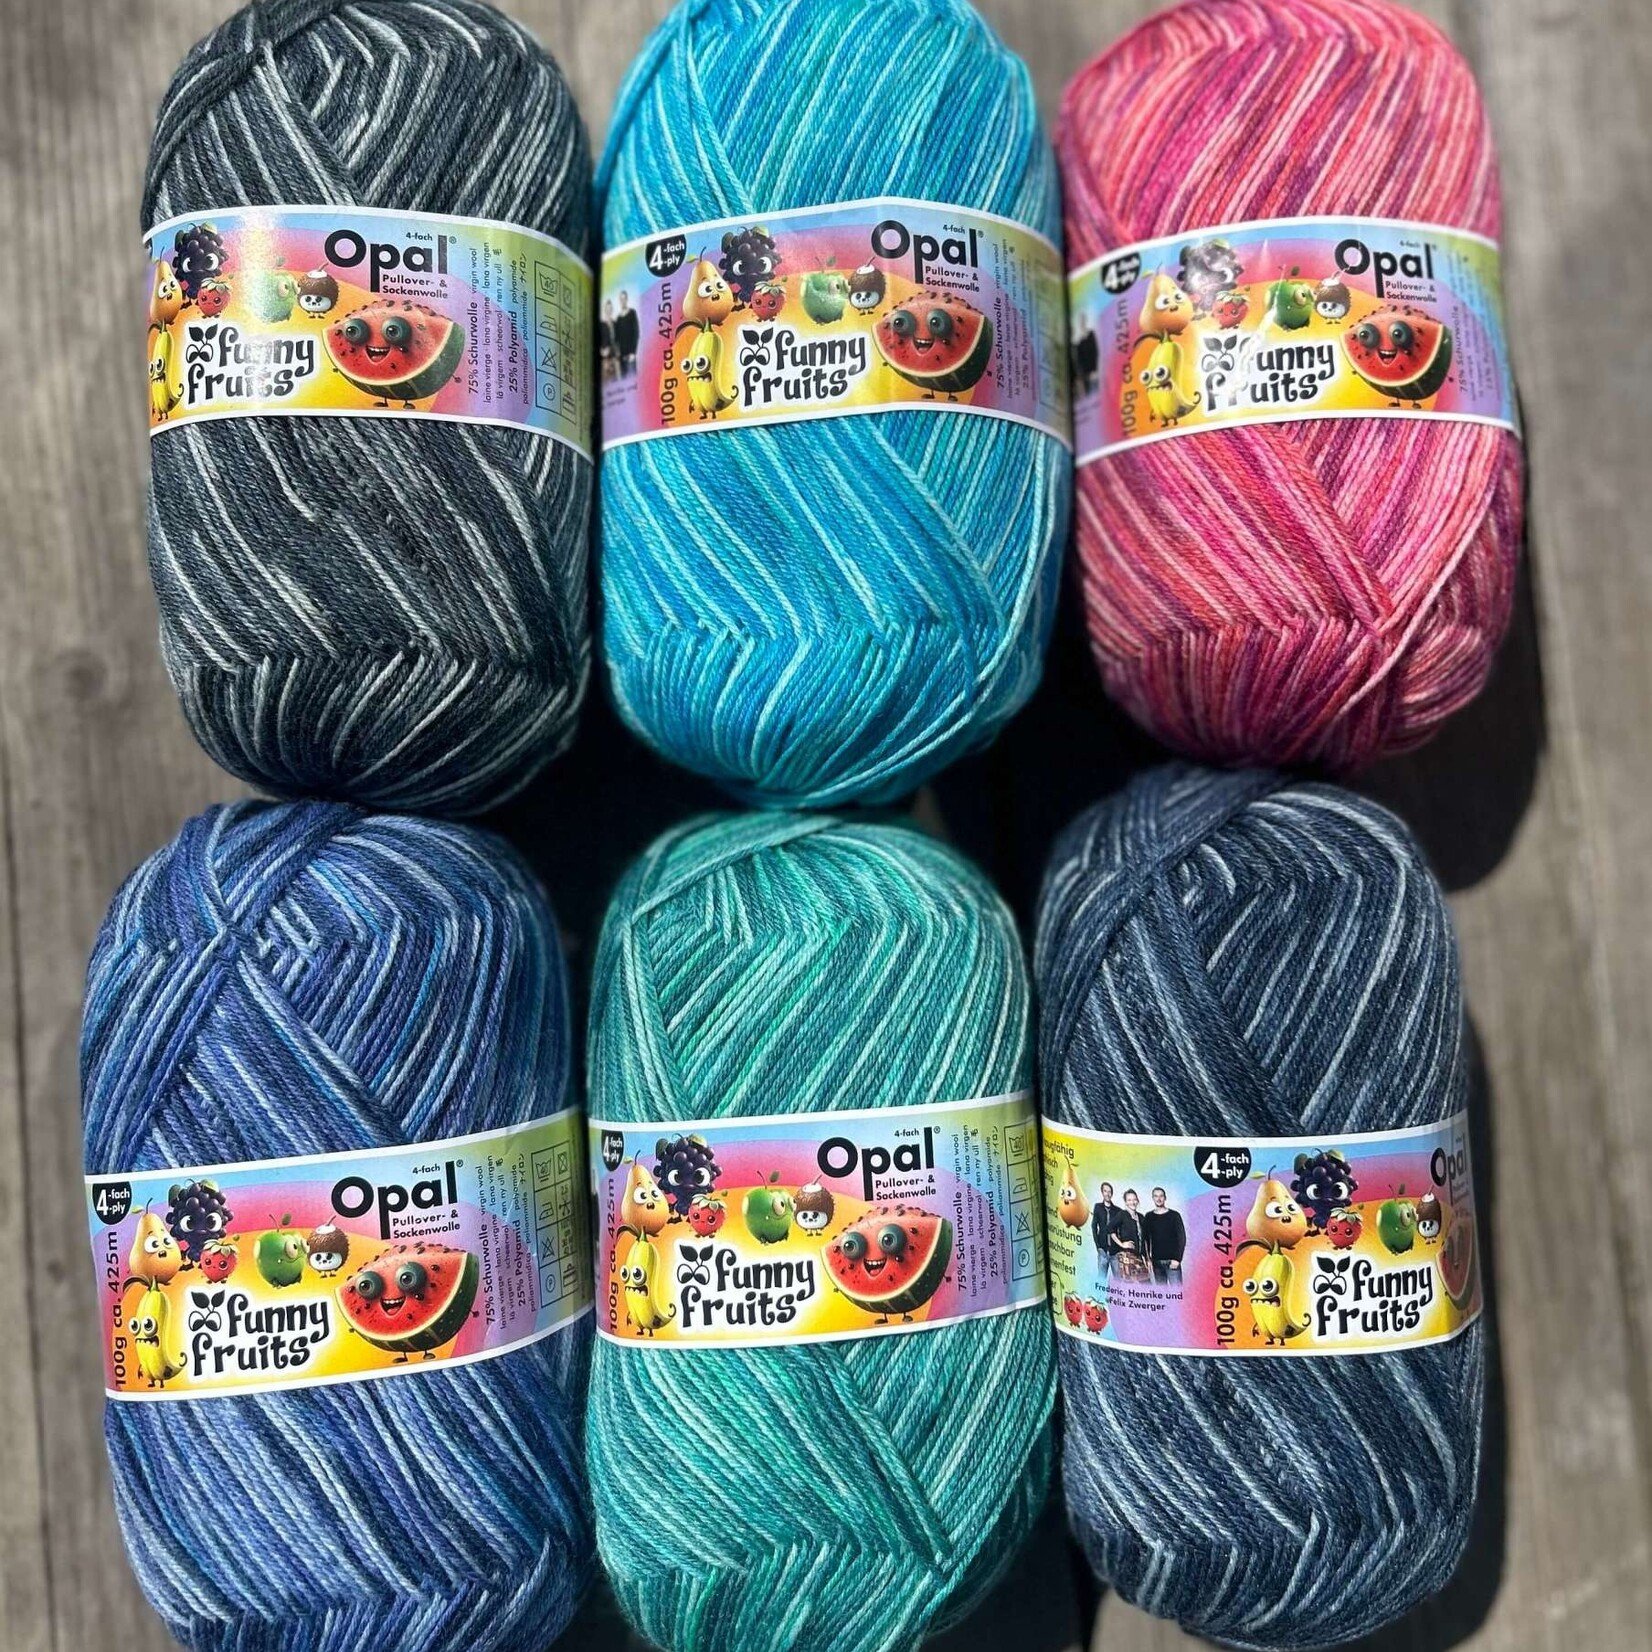 Opal Funny Fruits (4 ply) by Opal